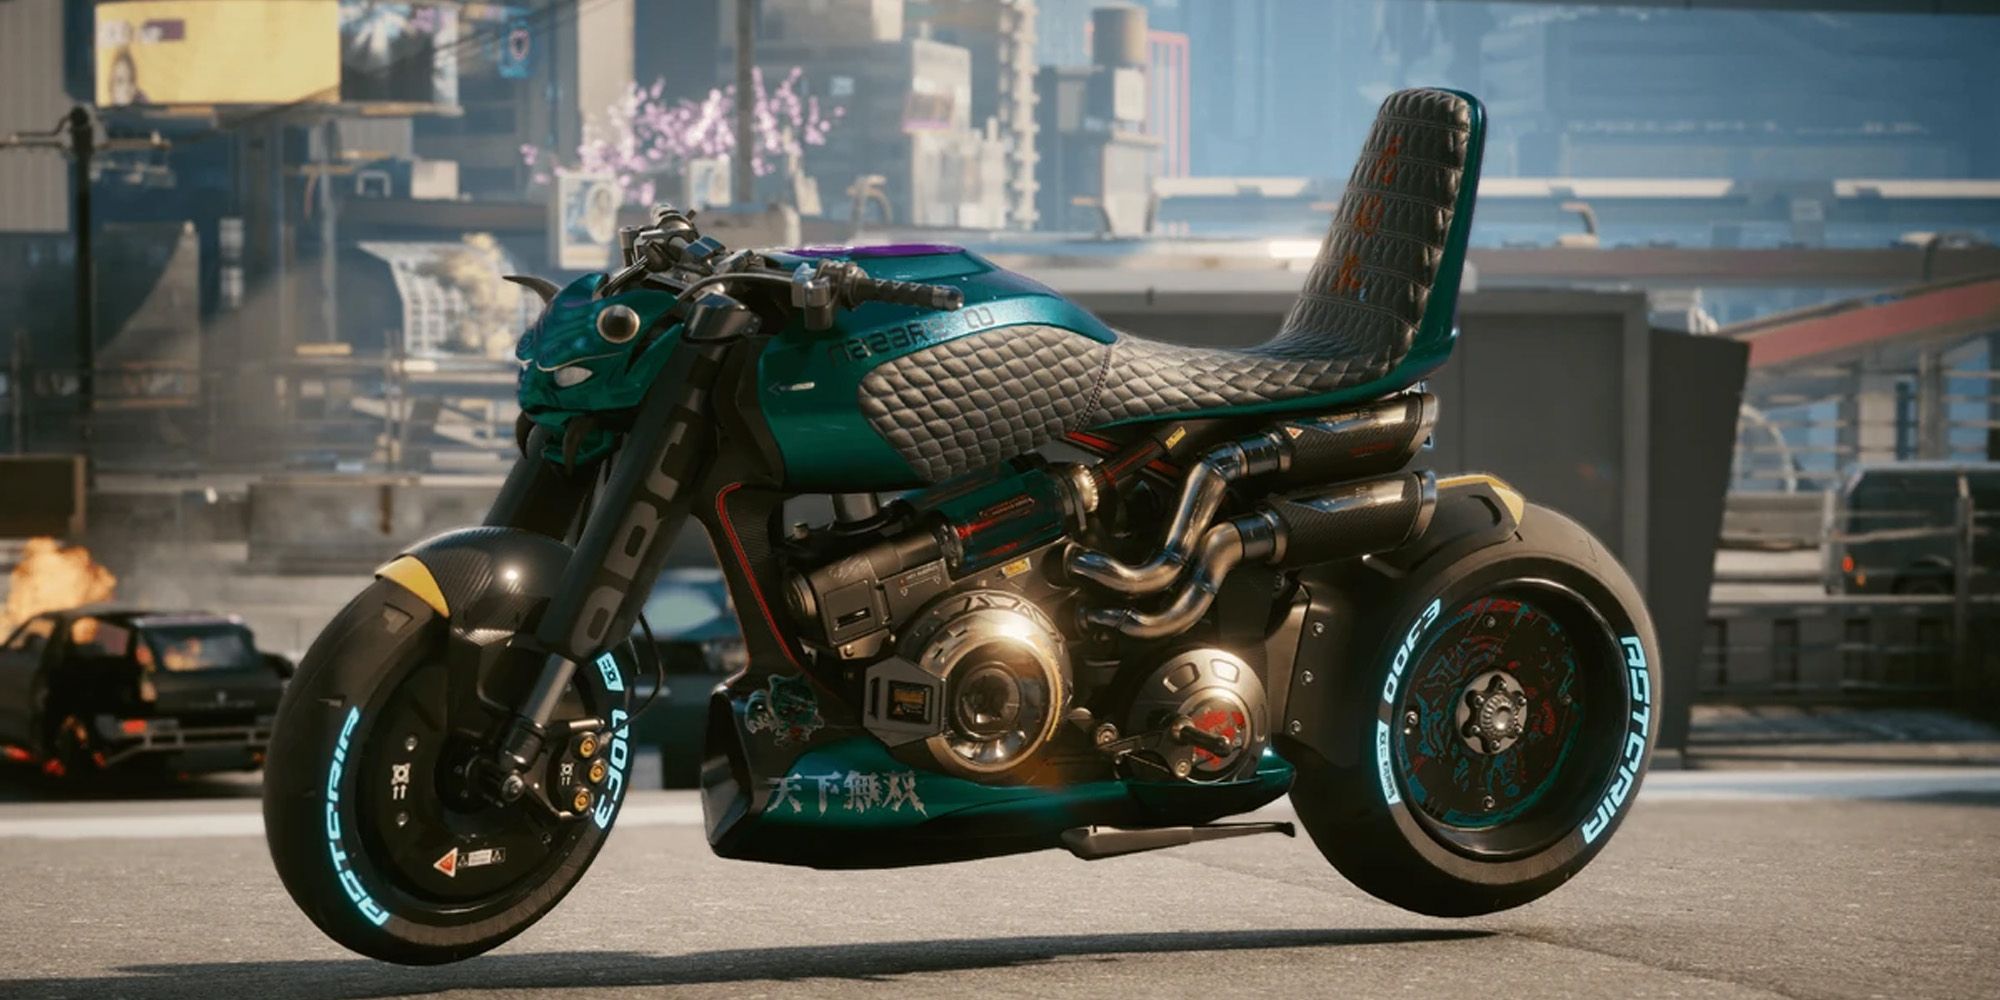 An Arch Nazare Itsumade on the street in Cyberpunk 2077, a luxurious high-end bike.